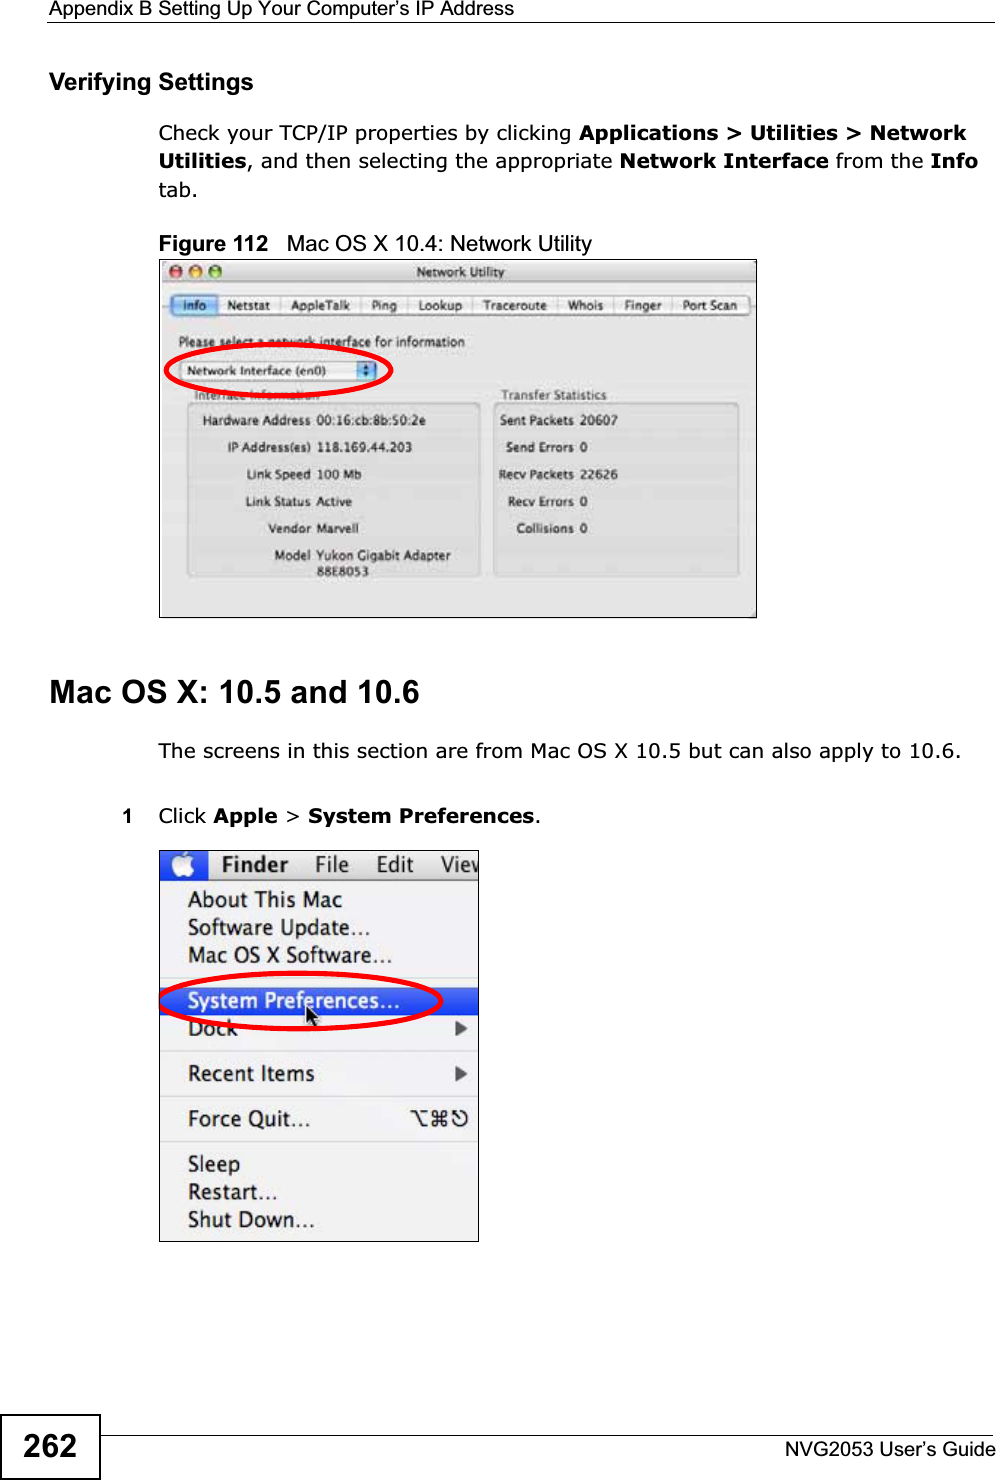 Appendix B Setting Up Your Computer’s IP AddressNVG2053 User’s Guide262Verifying SettingsCheck your TCP/IP properties by clicking Applications &gt; Utilities &gt; Network Utilities, and then selecting the appropriate Network Interface from the Infotab.Figure 112   Mac OS X 10.4: Network UtilityMac OS X: 10.5 and 10.6The screens in this section are from Mac OS X 10.5 but can also apply to 10.6.1Click Apple &gt; System Preferences.